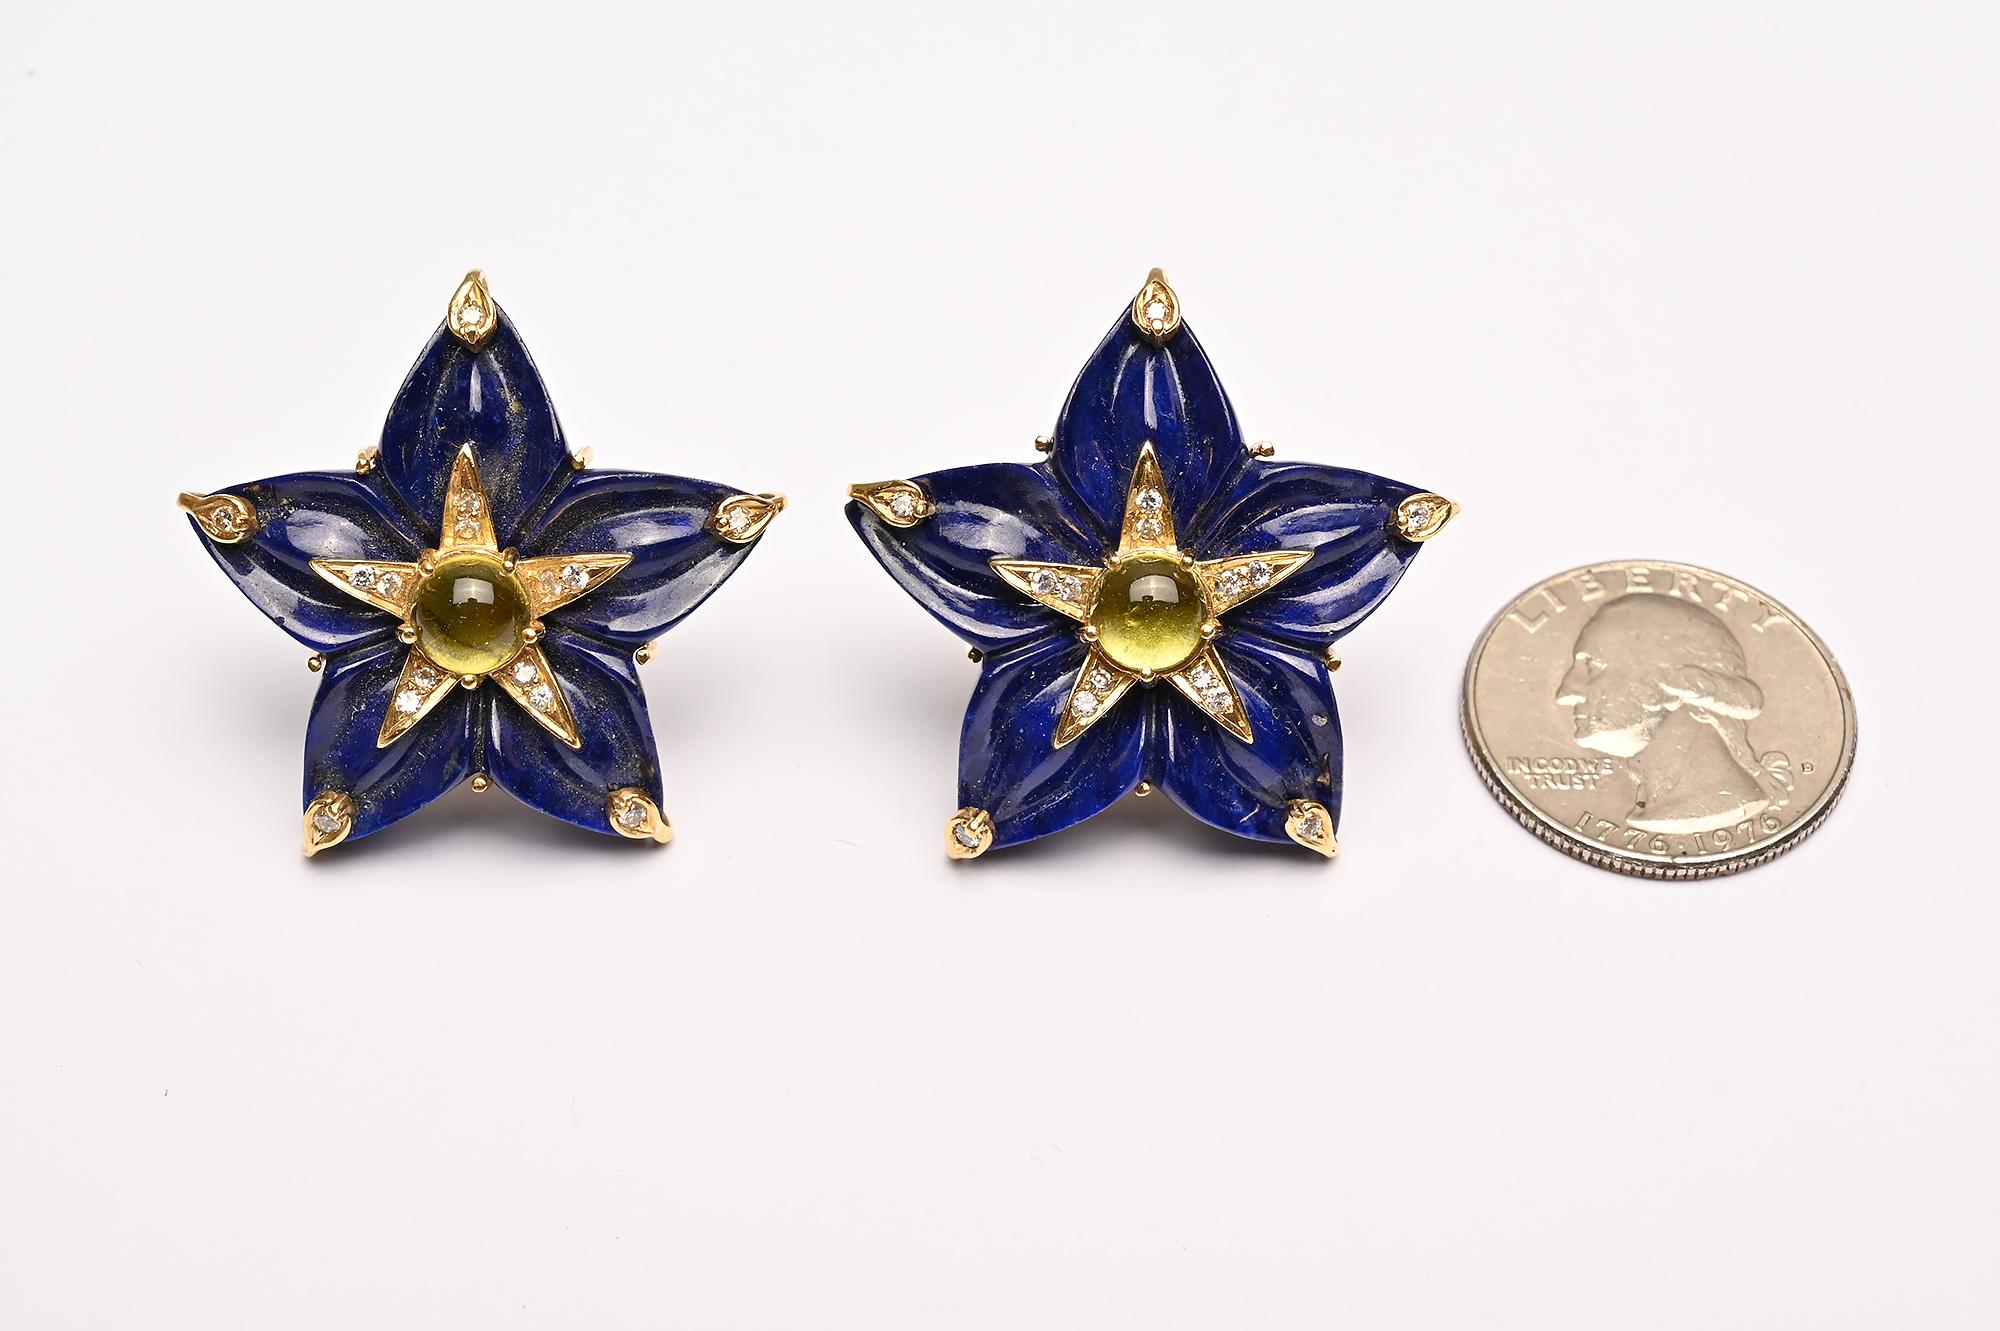 Bold and unusual  earrings with the star made of carved lapis lazuli; a cabochon peridot in the center surrounded by a diamond star and tips. The backs are posts. Arms of the lapis star measure 1 1/2 inches in diameter.